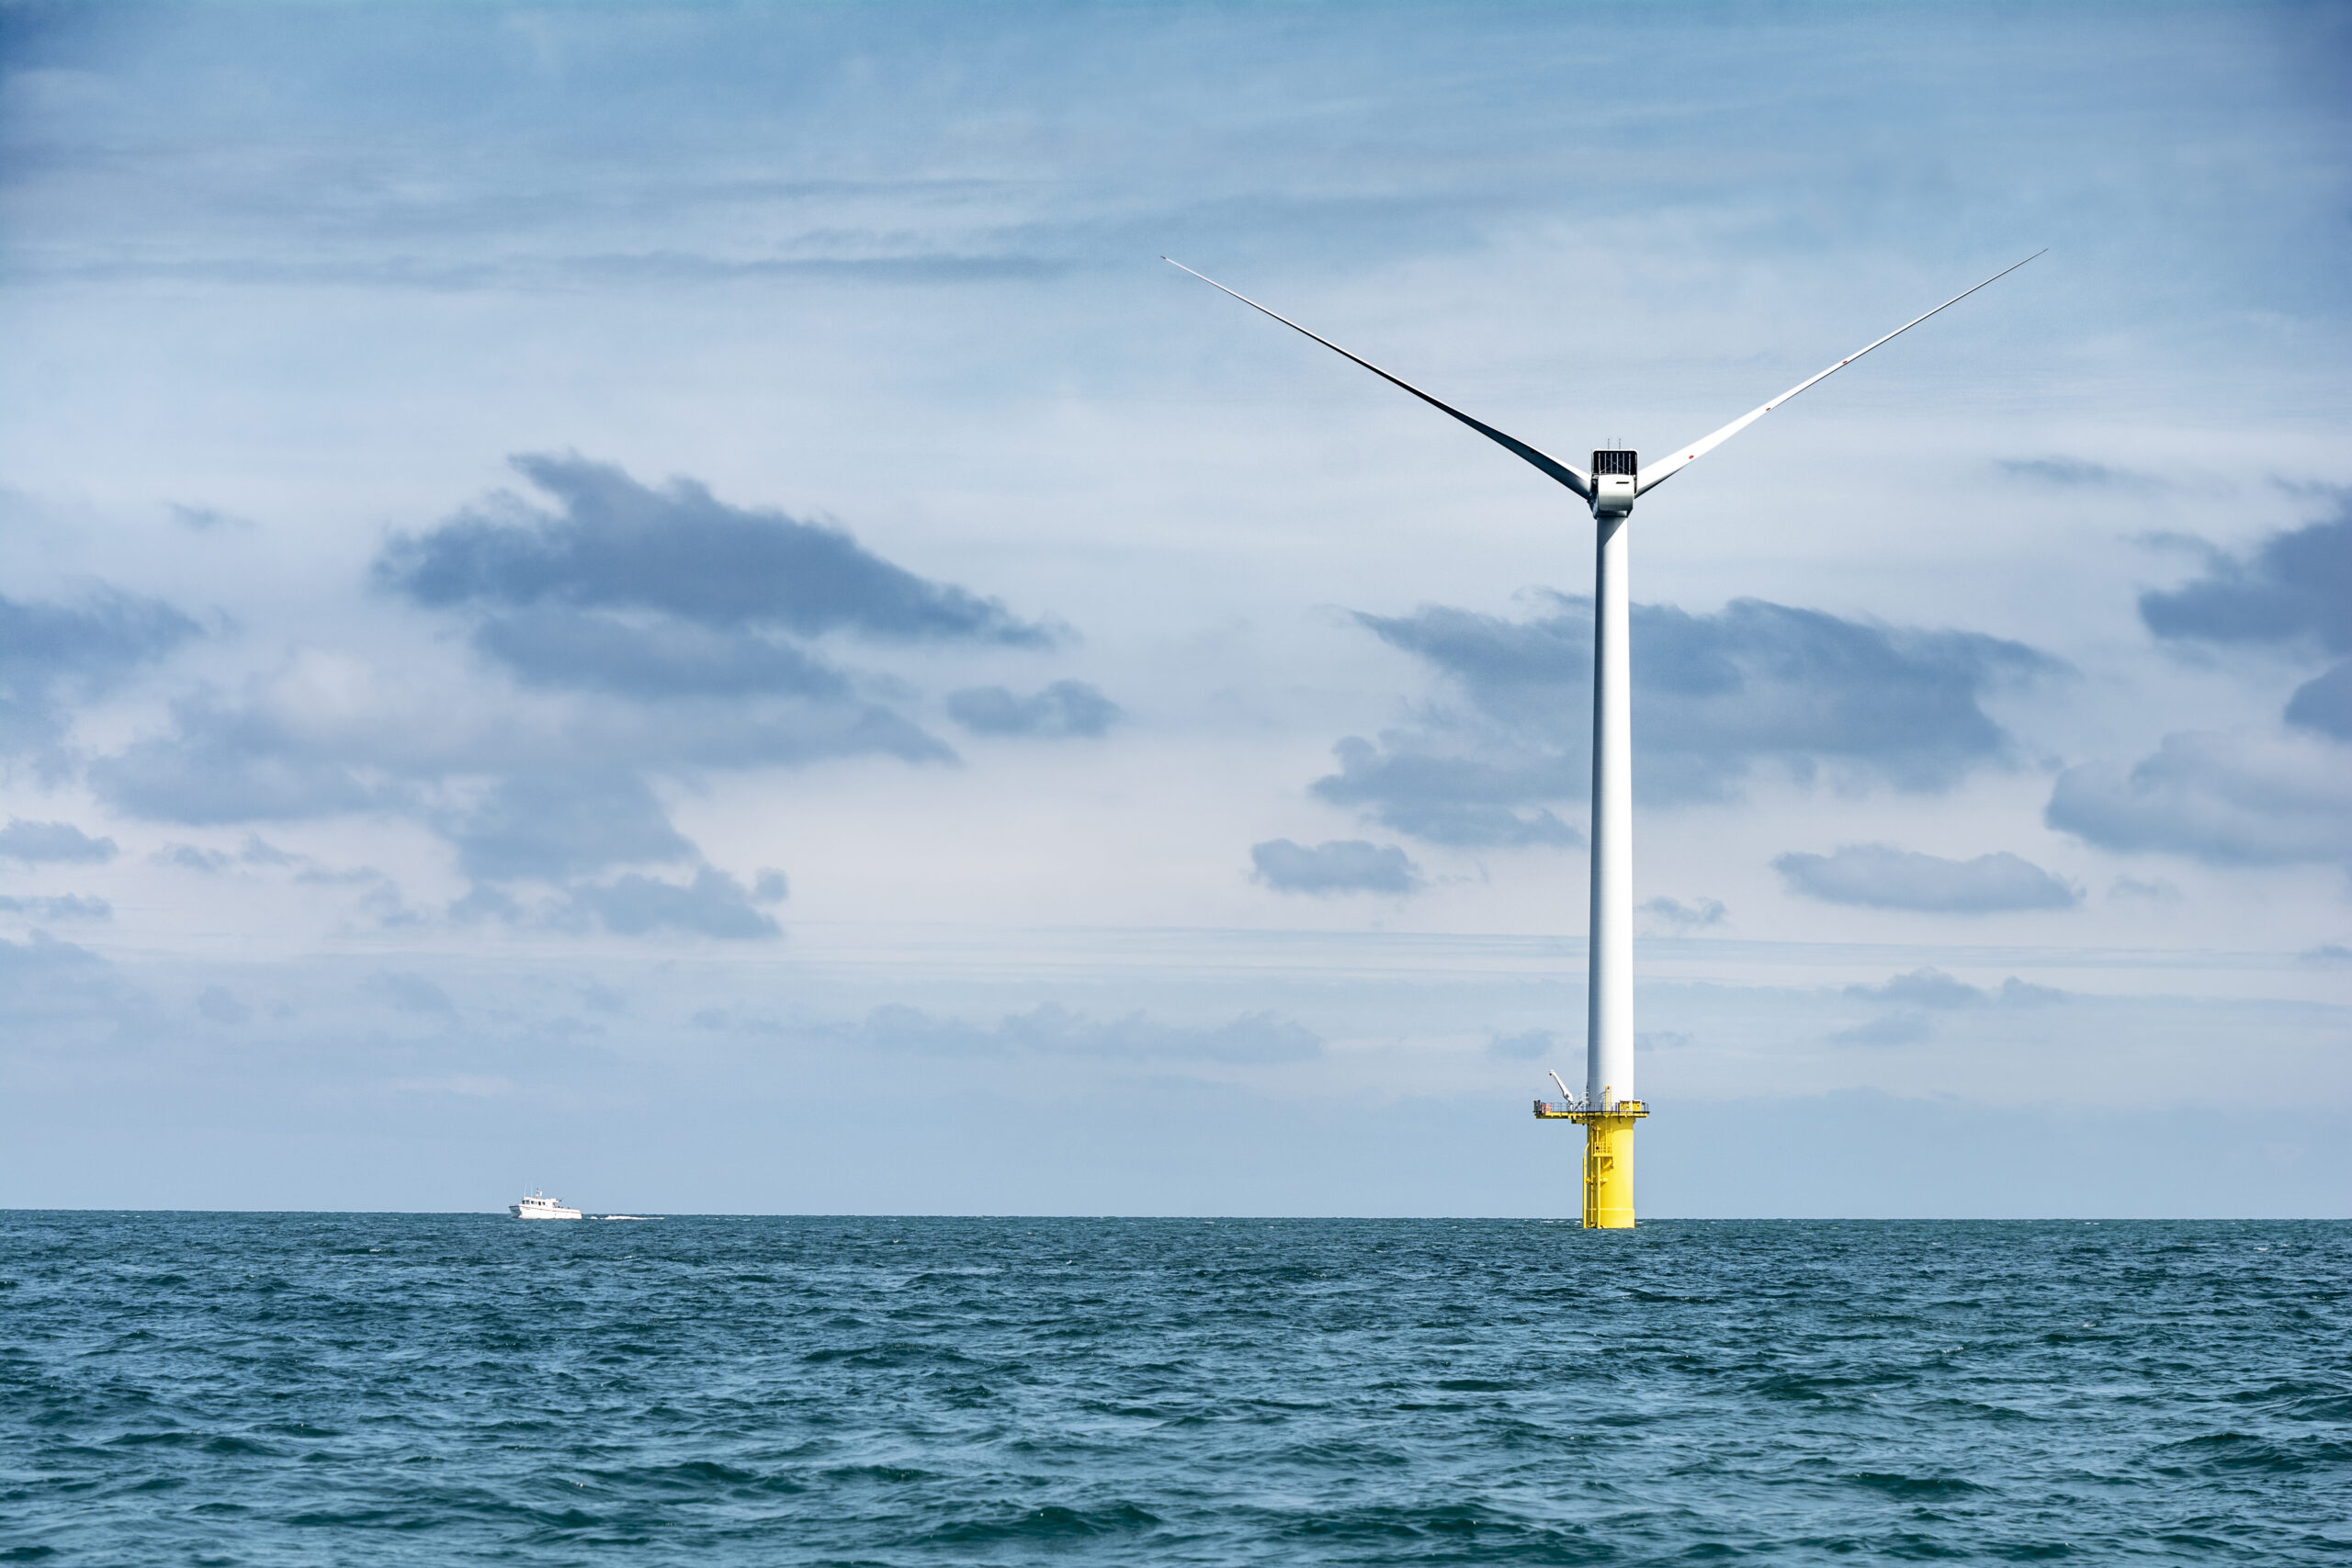 Massachusetts Residents Urge the Commonwealth to Build an Ocean Grid for Offshore Wind